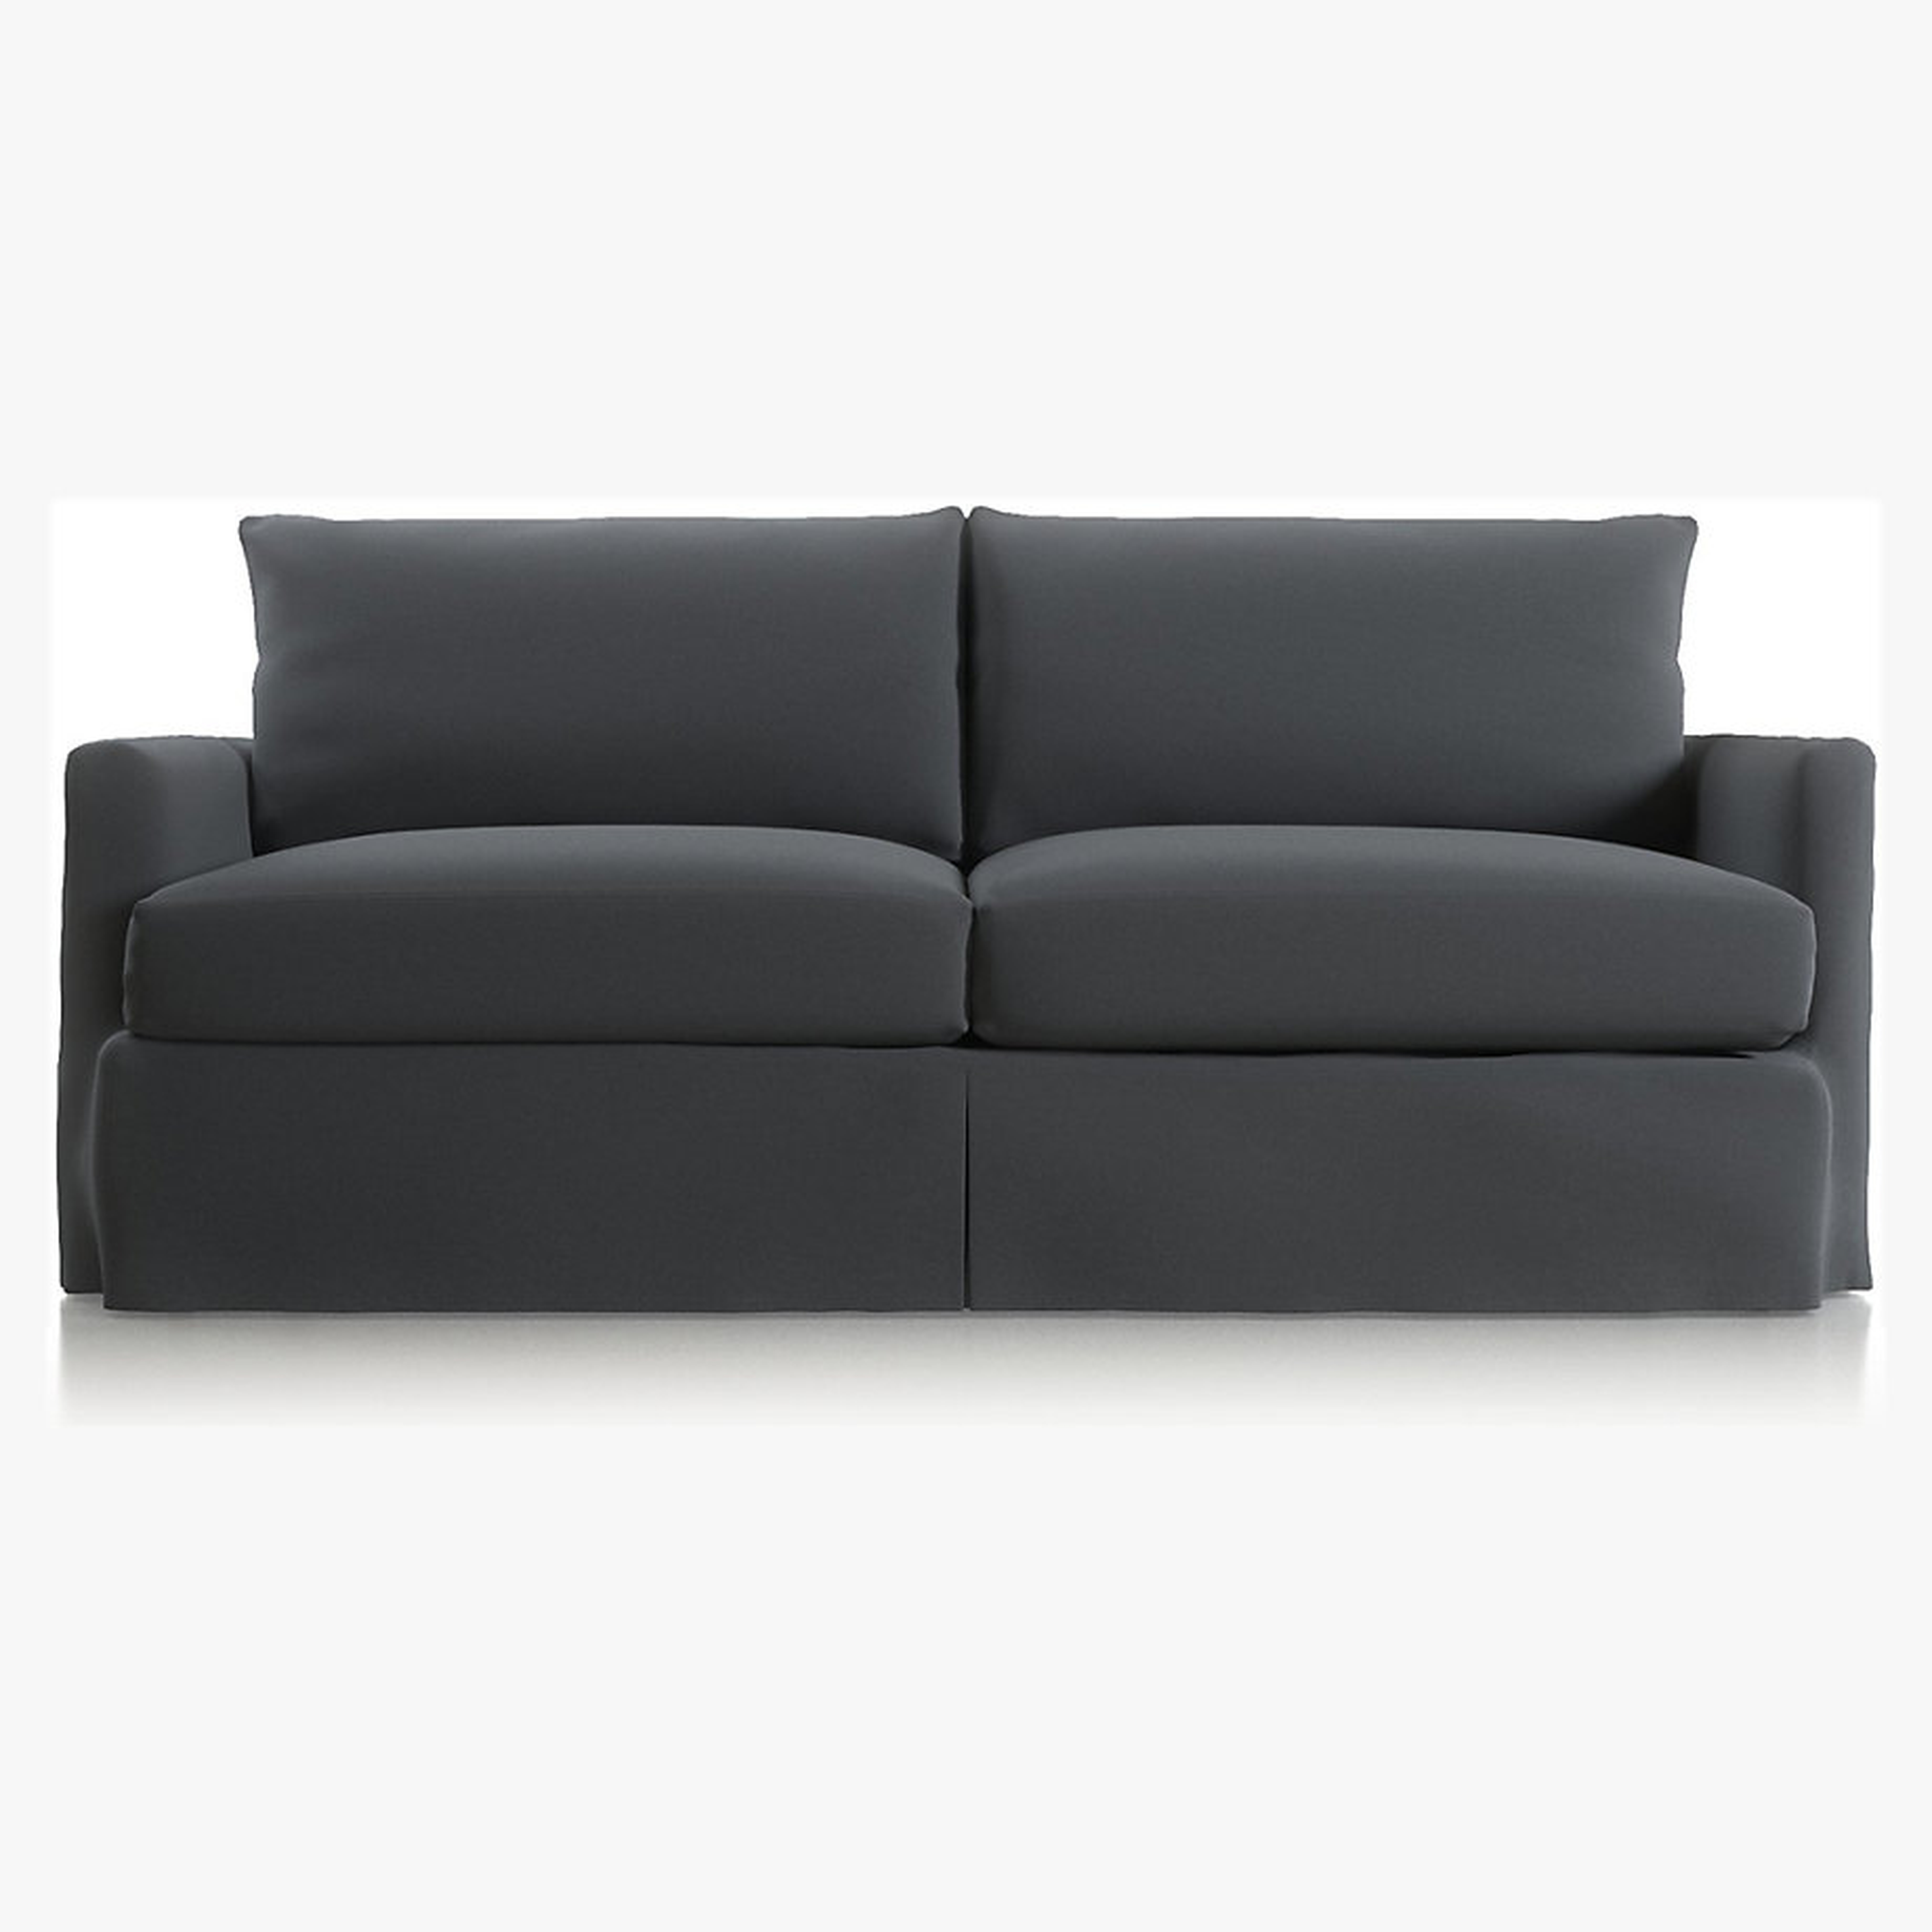 Lounge II Petite Outdoor Slipcovered 83" Sofa-Canvas, graphite - Crate and Barrel